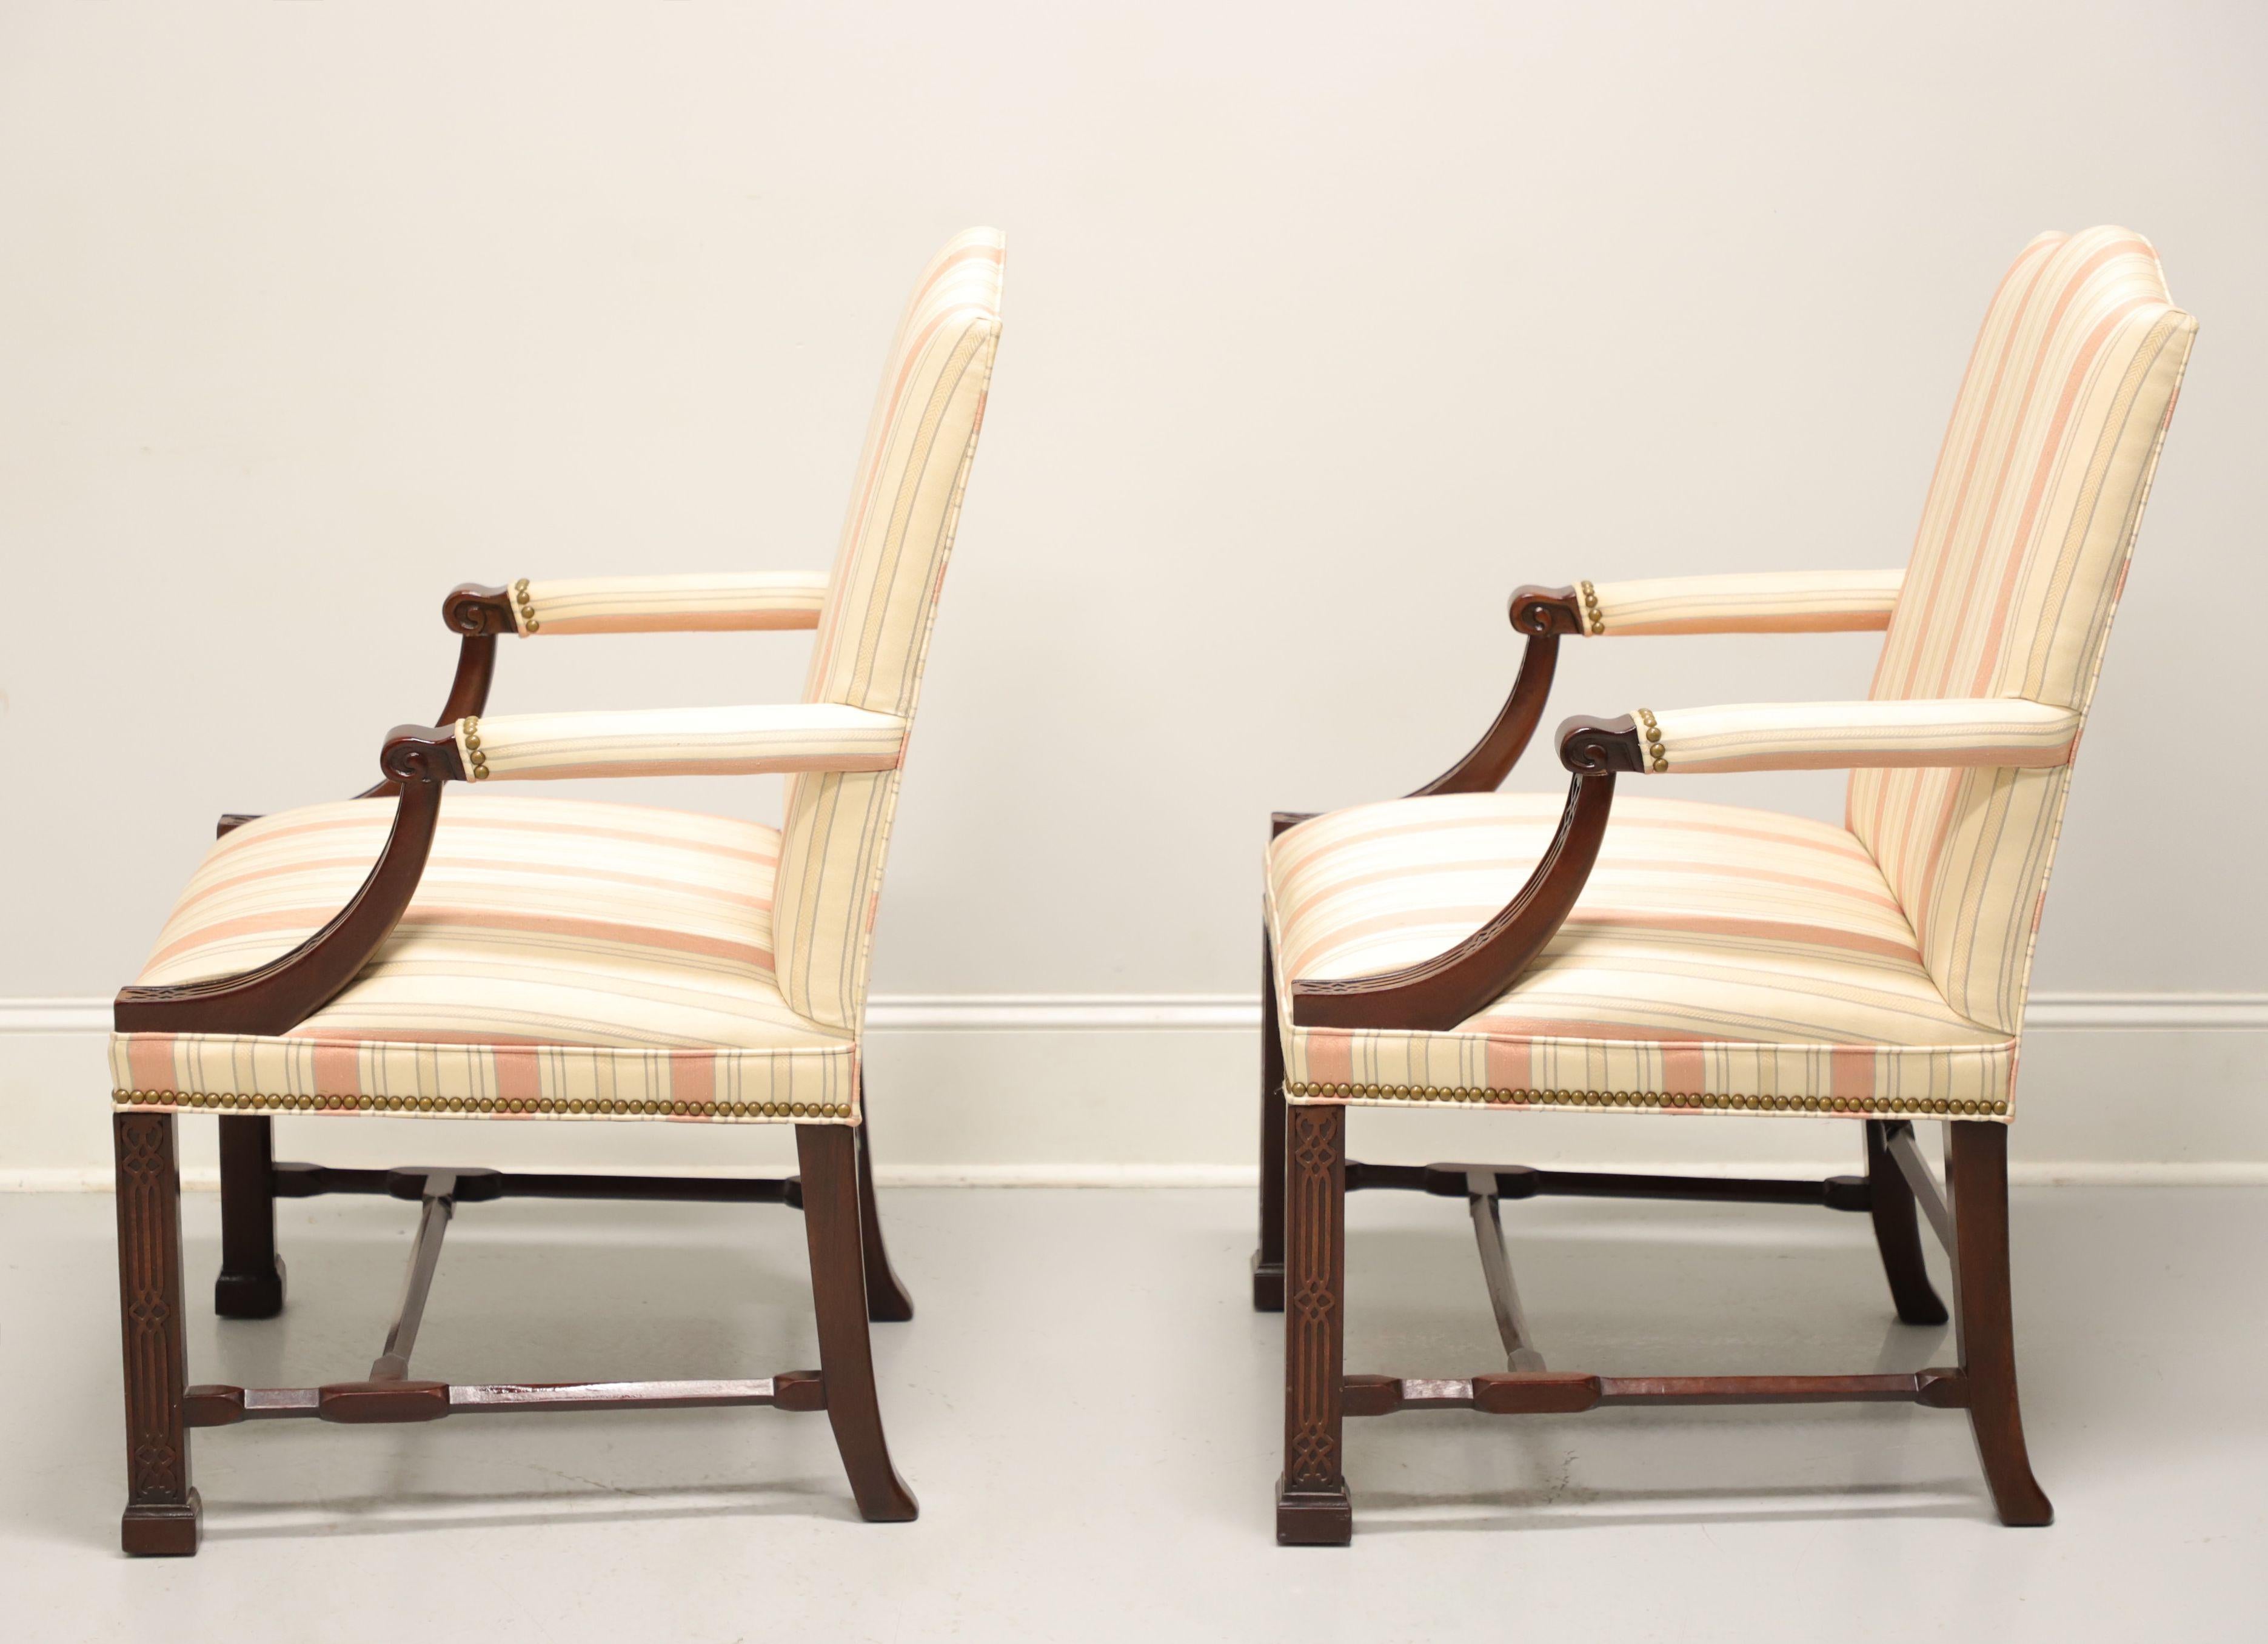 Brass HICKORY CHAIR Wentworth Mahogany Chippendale Style Fretwork Armchairs - Pair